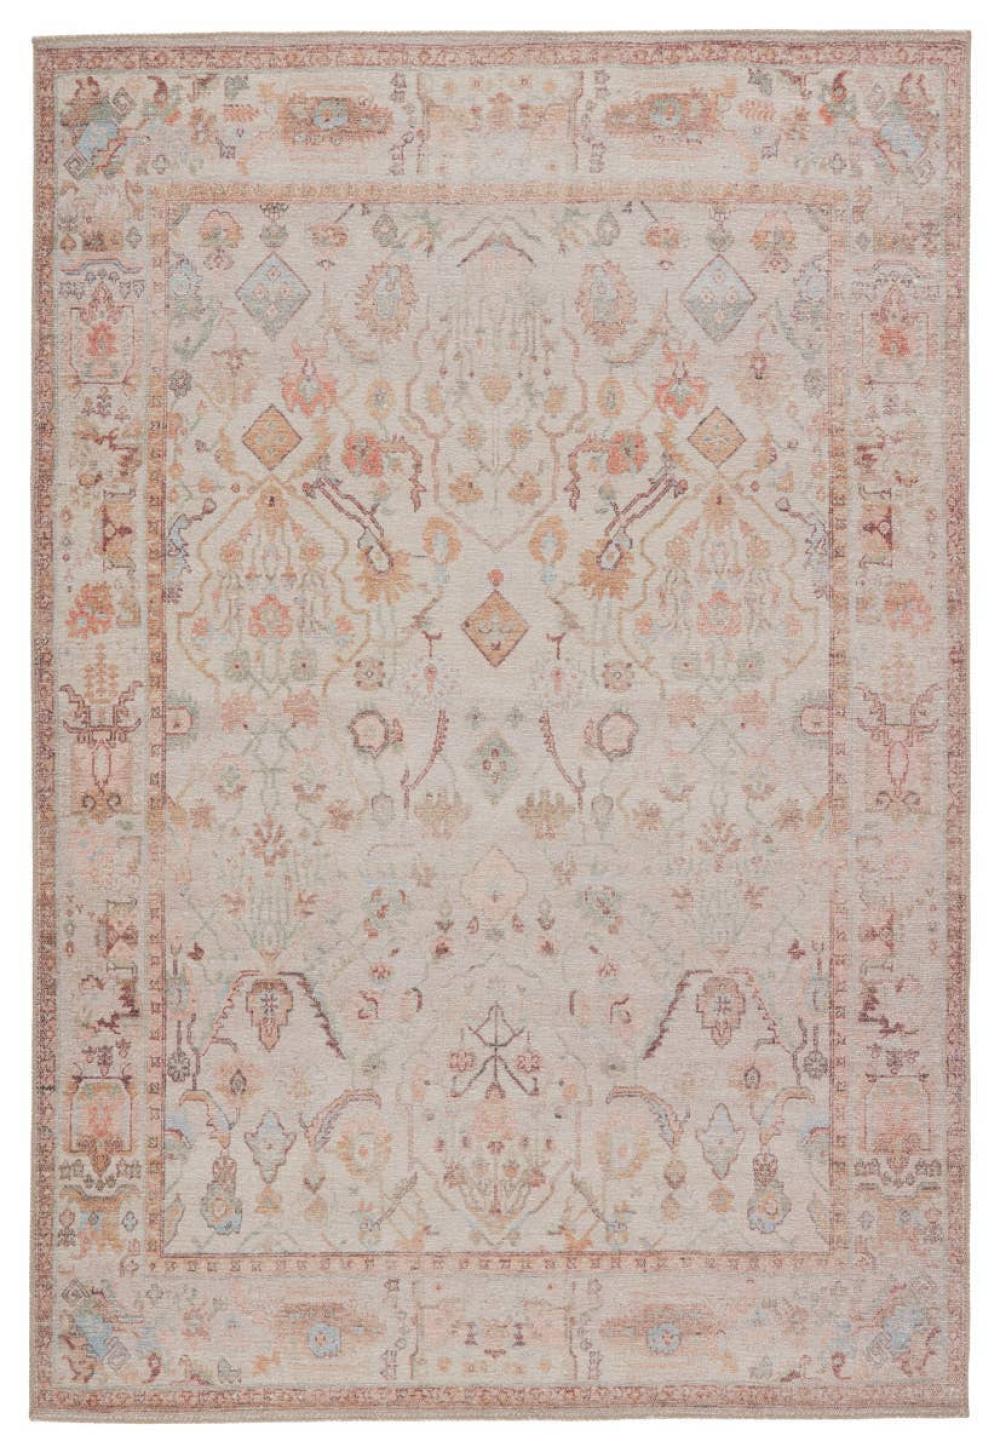 Turkish origin, Updated Traditional style rug, timeless grace with contemporary sophistication, seamlessly blends with décor, touch of historical grandeur.